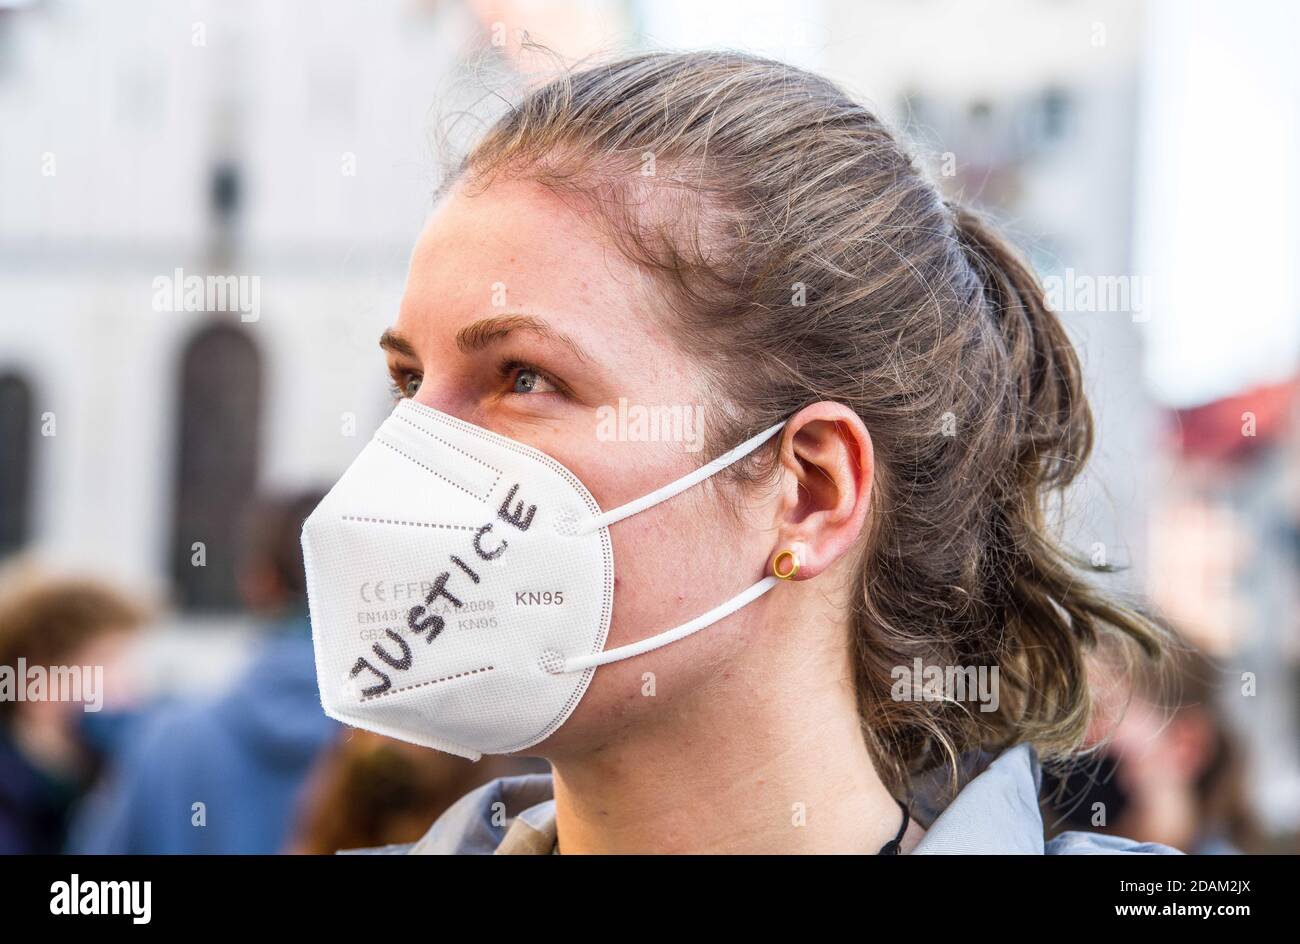 Munich, Bavaria, Germany. 13th Nov, 2020. A Fridays for Future demonstrator has the word ''justice'' written on her mask. Fridays for Future Germany has returned to the streets during the second wave of Coronavirus to protest against the clearing of the DannenrodÂ Forest (DannenrÃ¶derÂ Forst). The demonstrators marched from Marienplatz to the Green Party offices where three protestors climbed a tree a hung a banner which eventually resulted in a police response that was initially peacefully resolved until unidentified plainclothes officers attempted an apprehension without identifying them Stock Photo